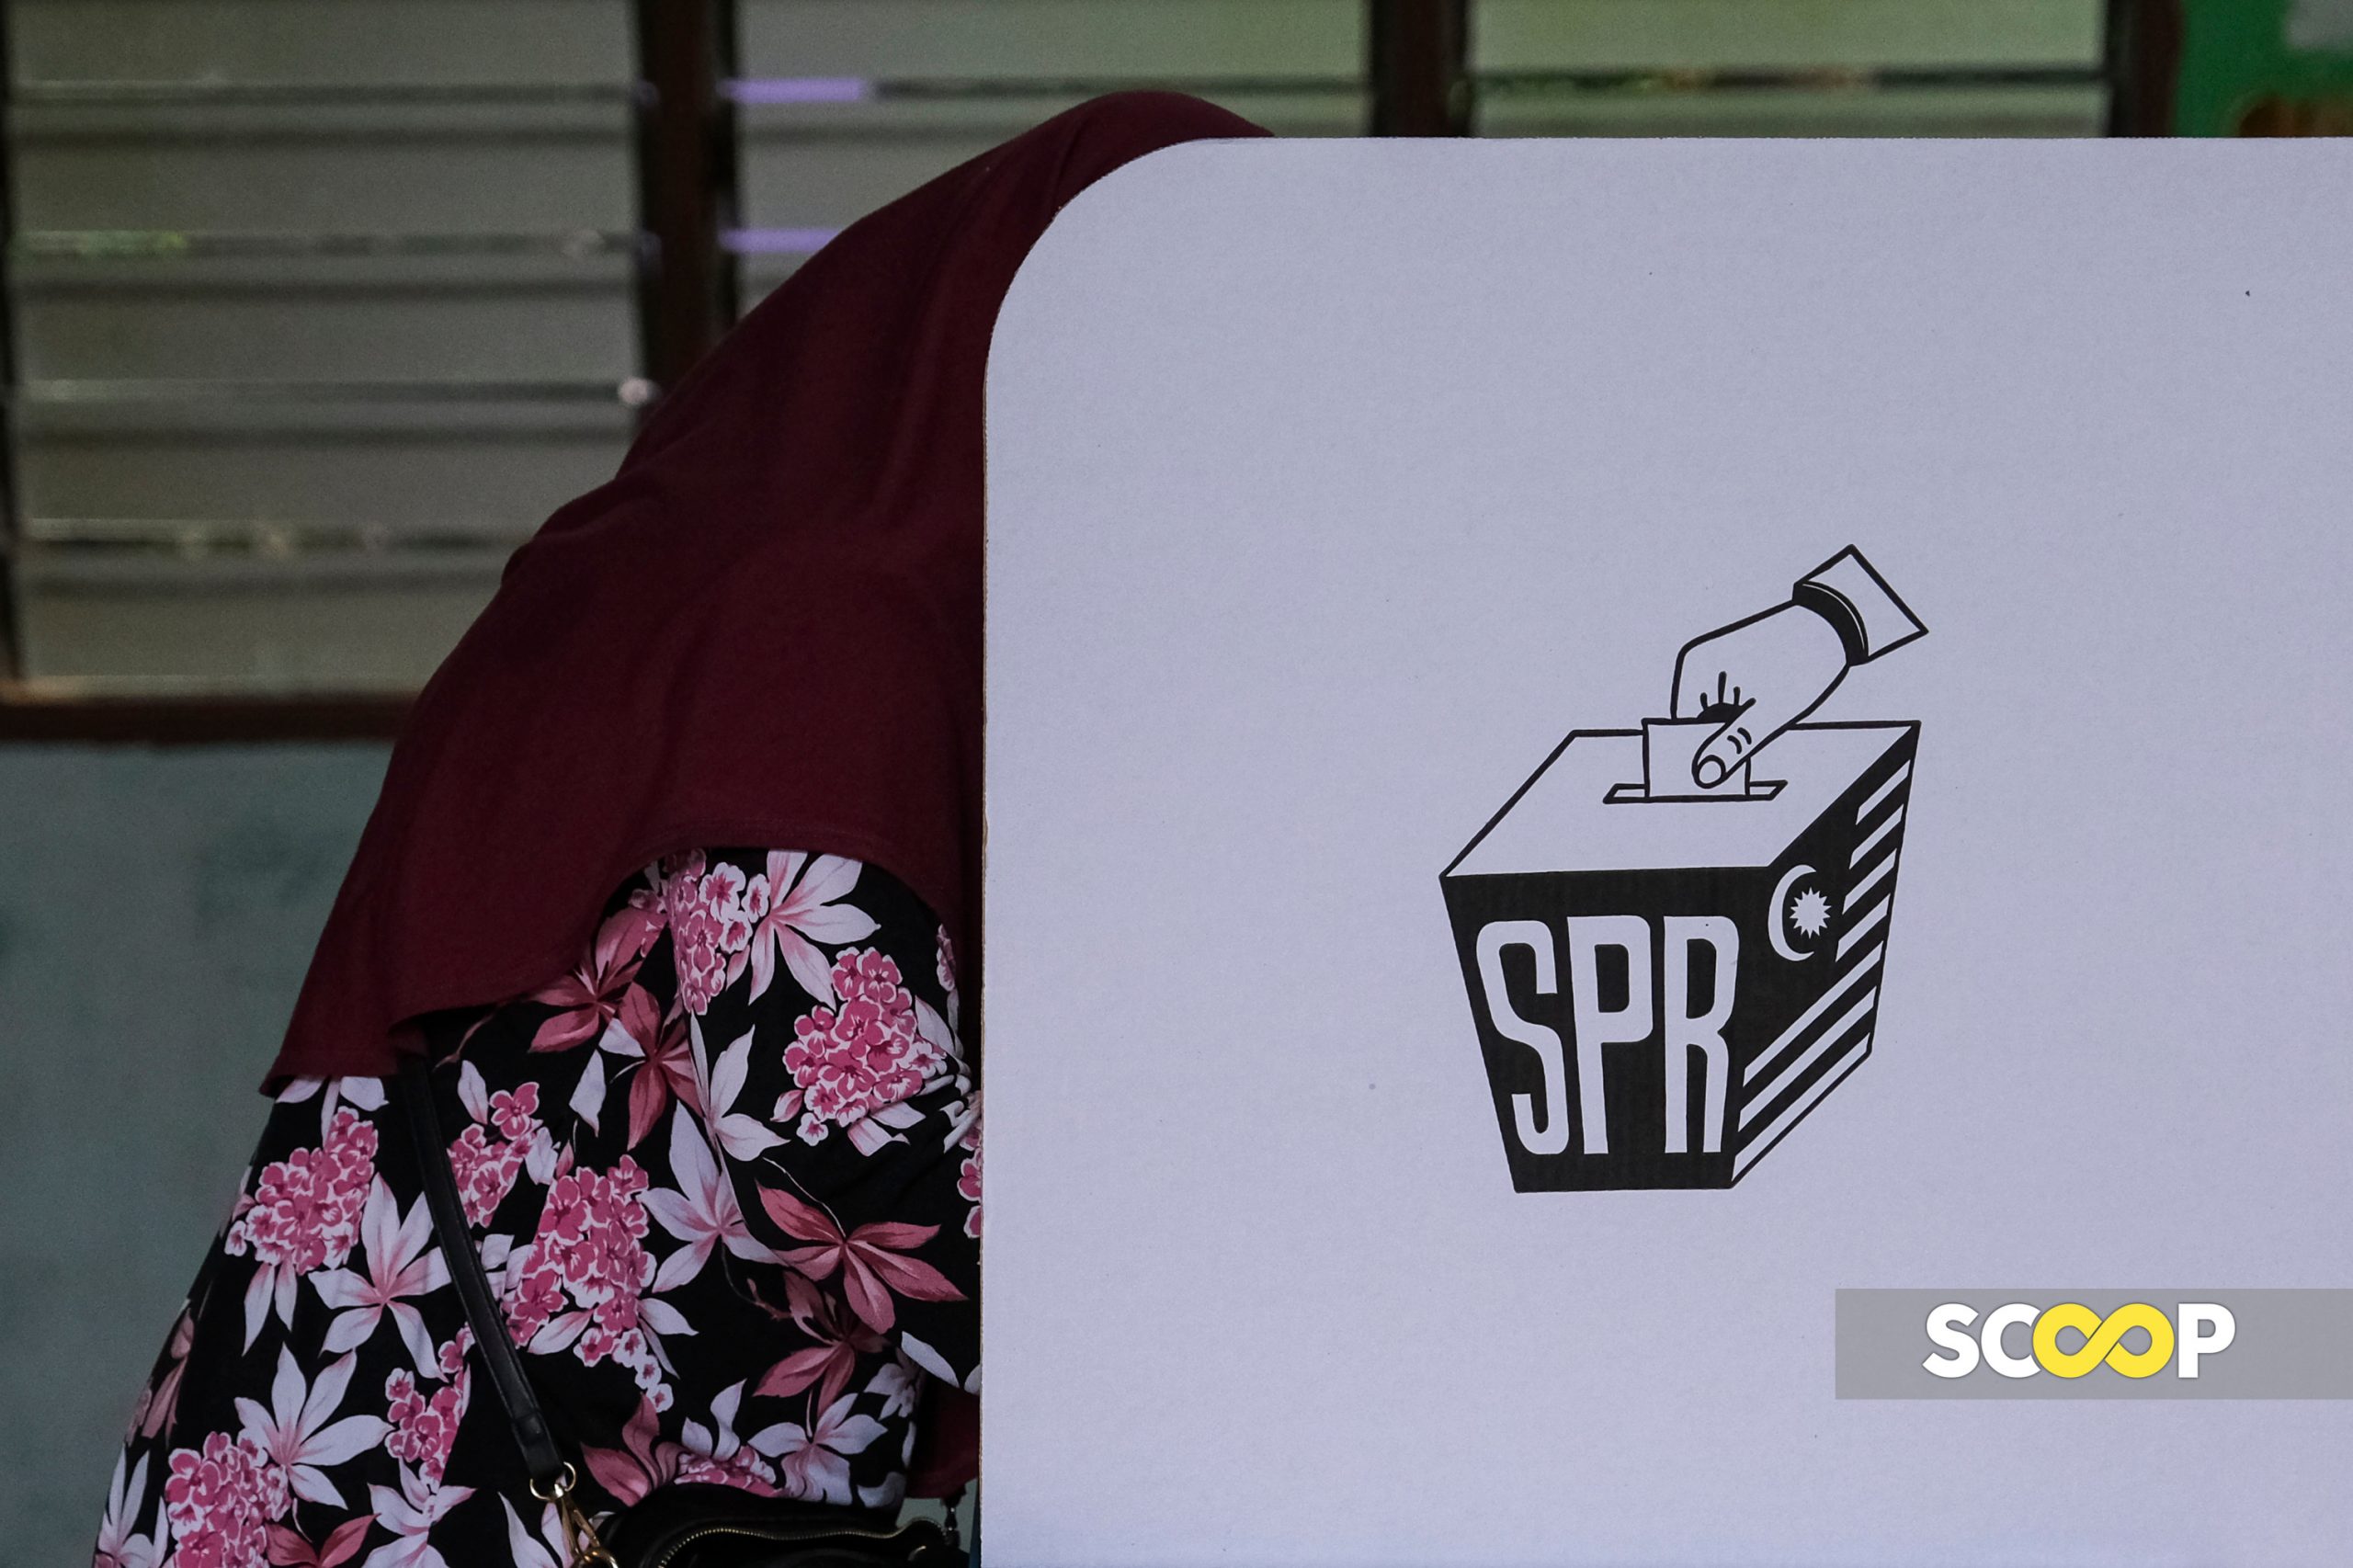 Postal votes collected from Malaysians in S’pore unsatisfactory: movements